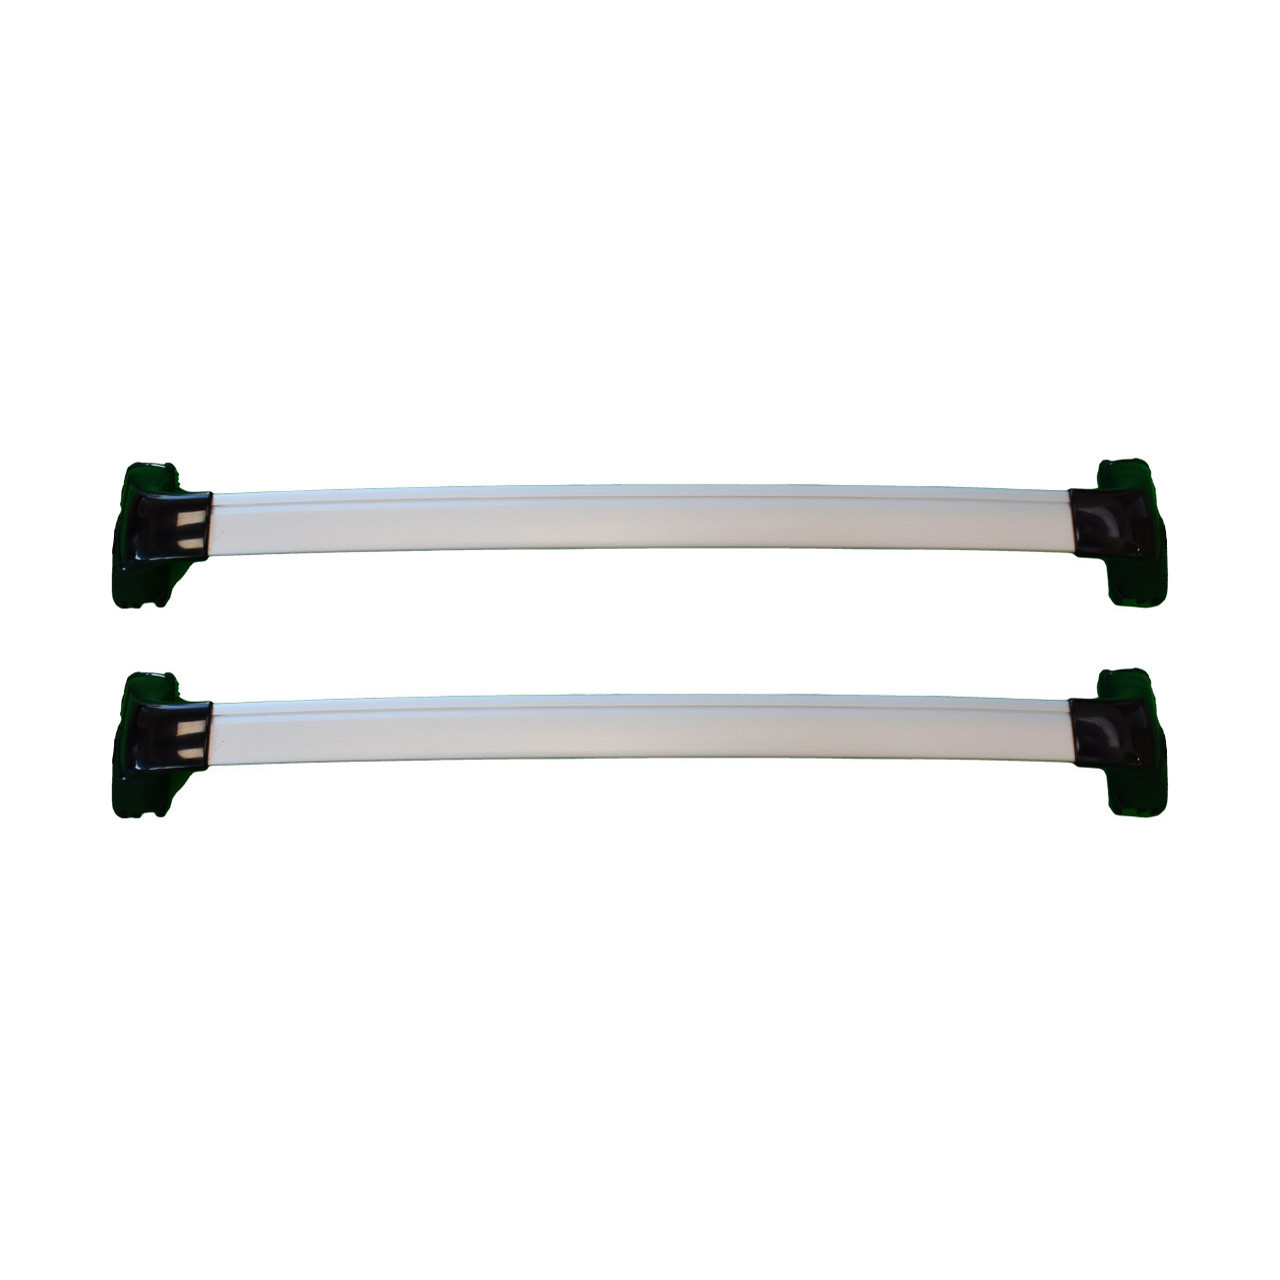 2021-2025 Genesis GV80 Roof Rack Crossbars - Free Shipping | Genesis Parts  and Accessories